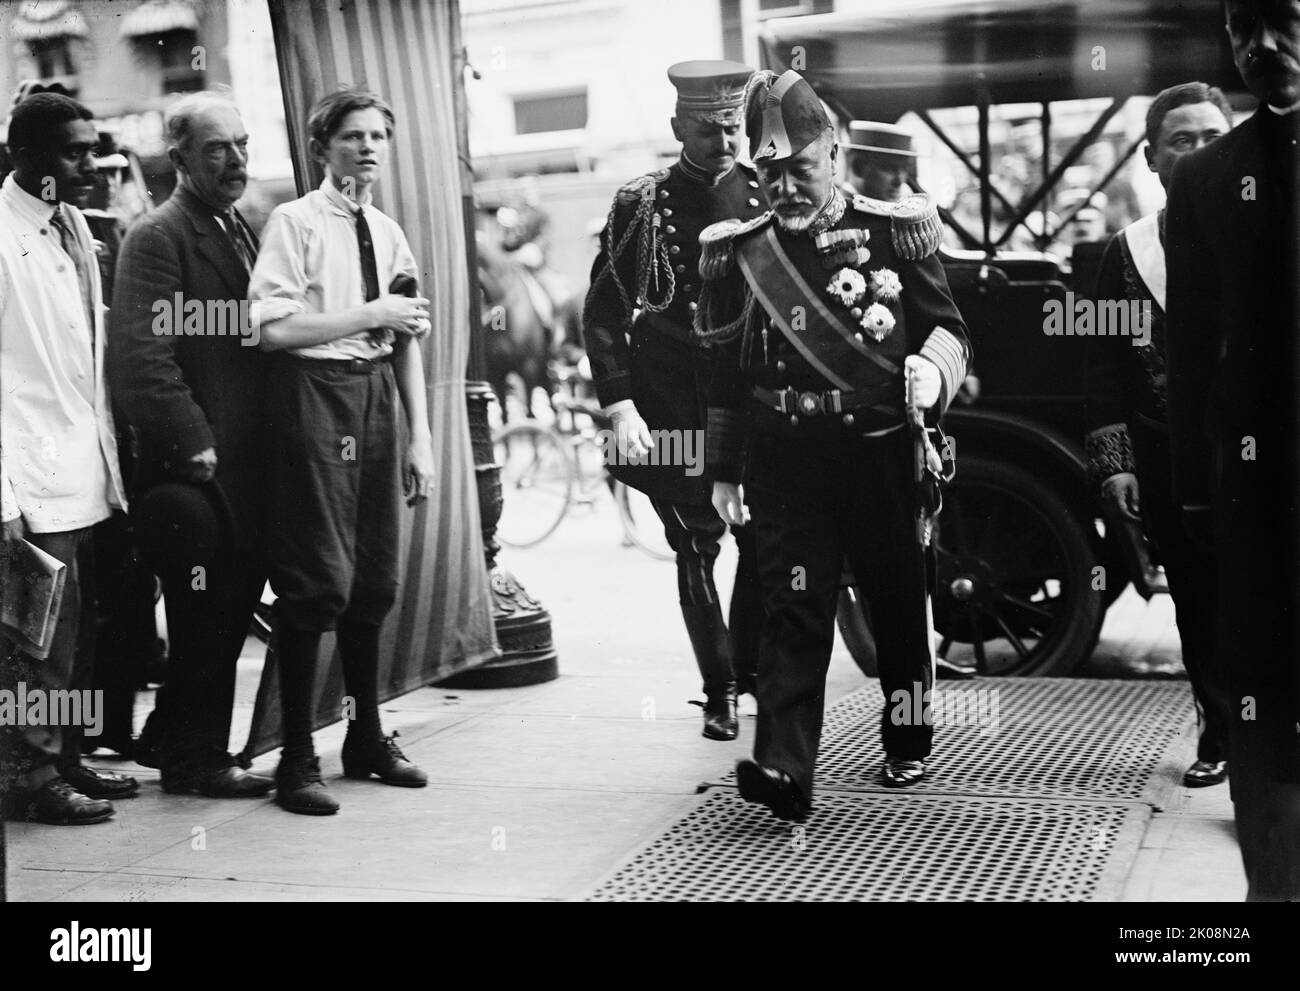 Togo At U.S. Naval Academy, [Annapolis, Maryland], 1911. [Marshal-Admiral the Marquis Togo Heihachiro was admiral of the fleet in the Imperial Japanese Navy.] Stock Photo